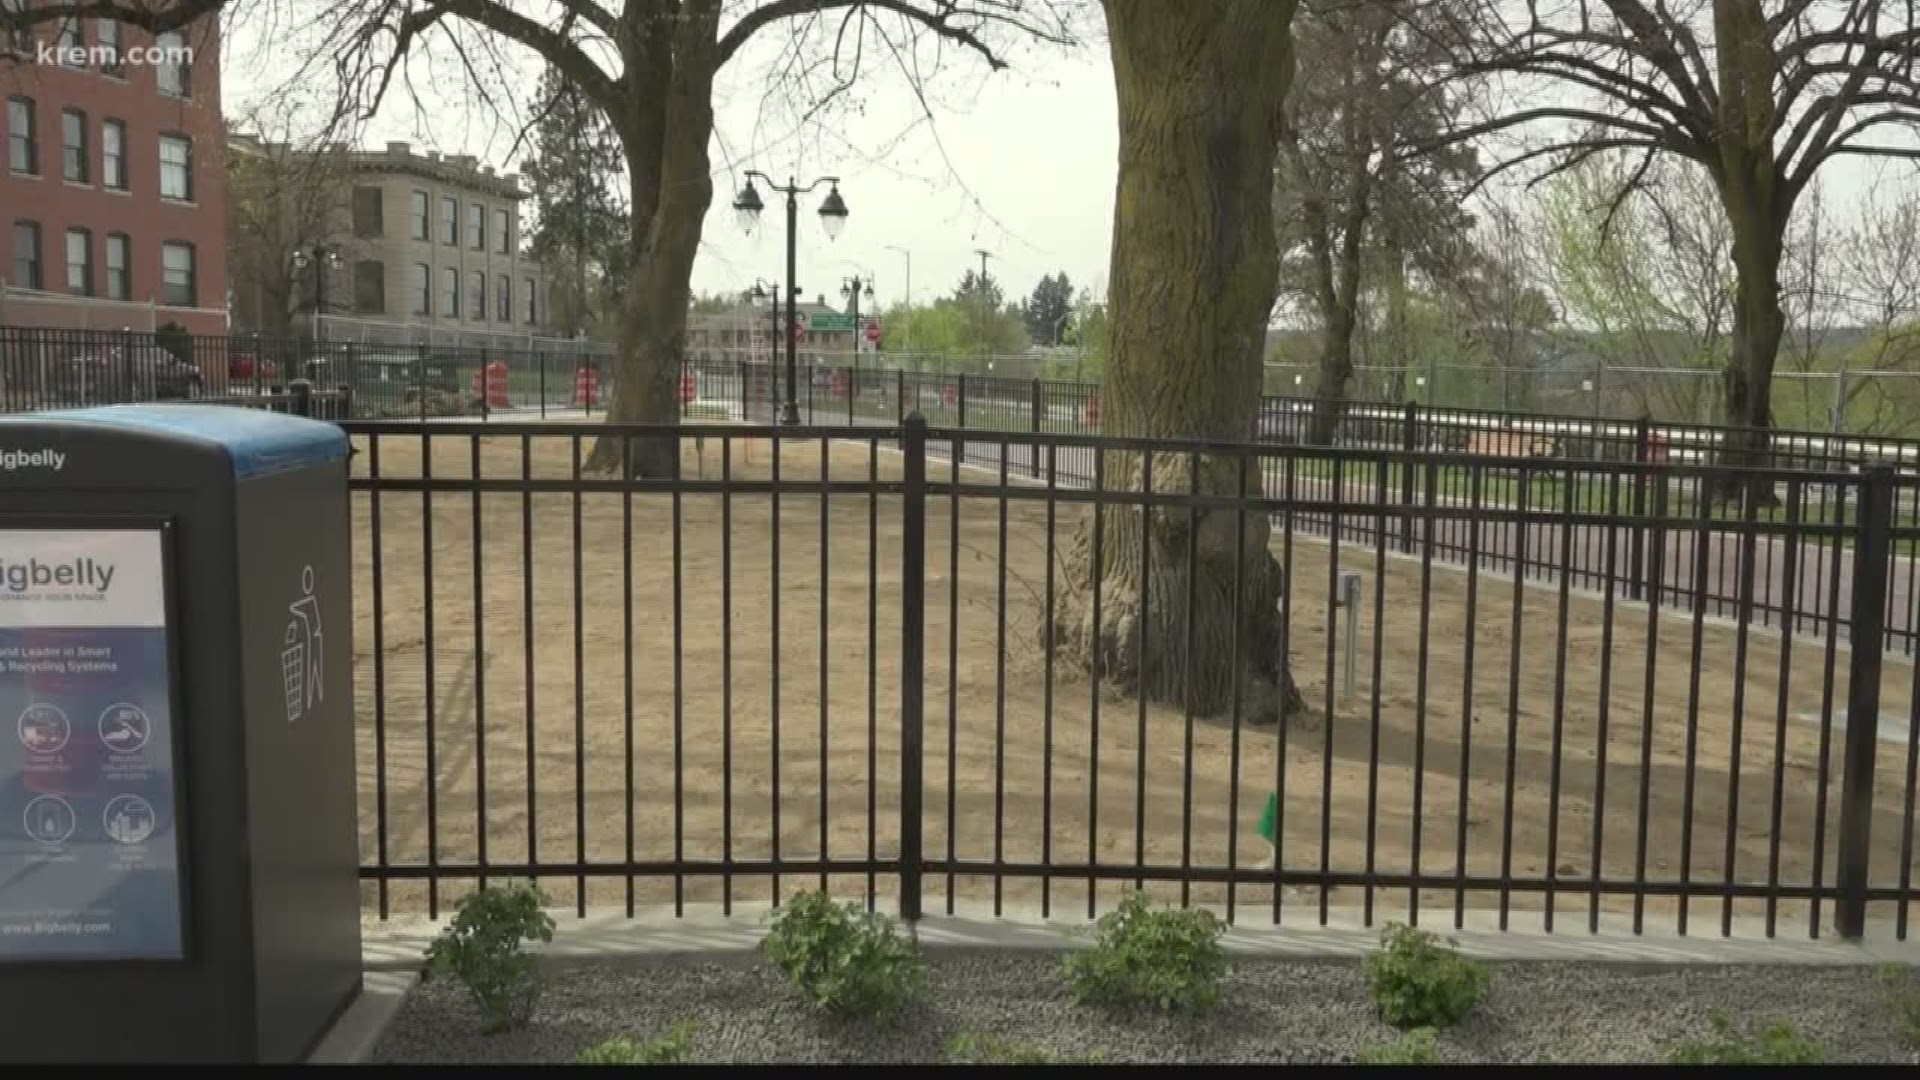 KREM Reporter Amanda Roley talks to dog owners about the first downtown Spokane dog park, set to open May 2.